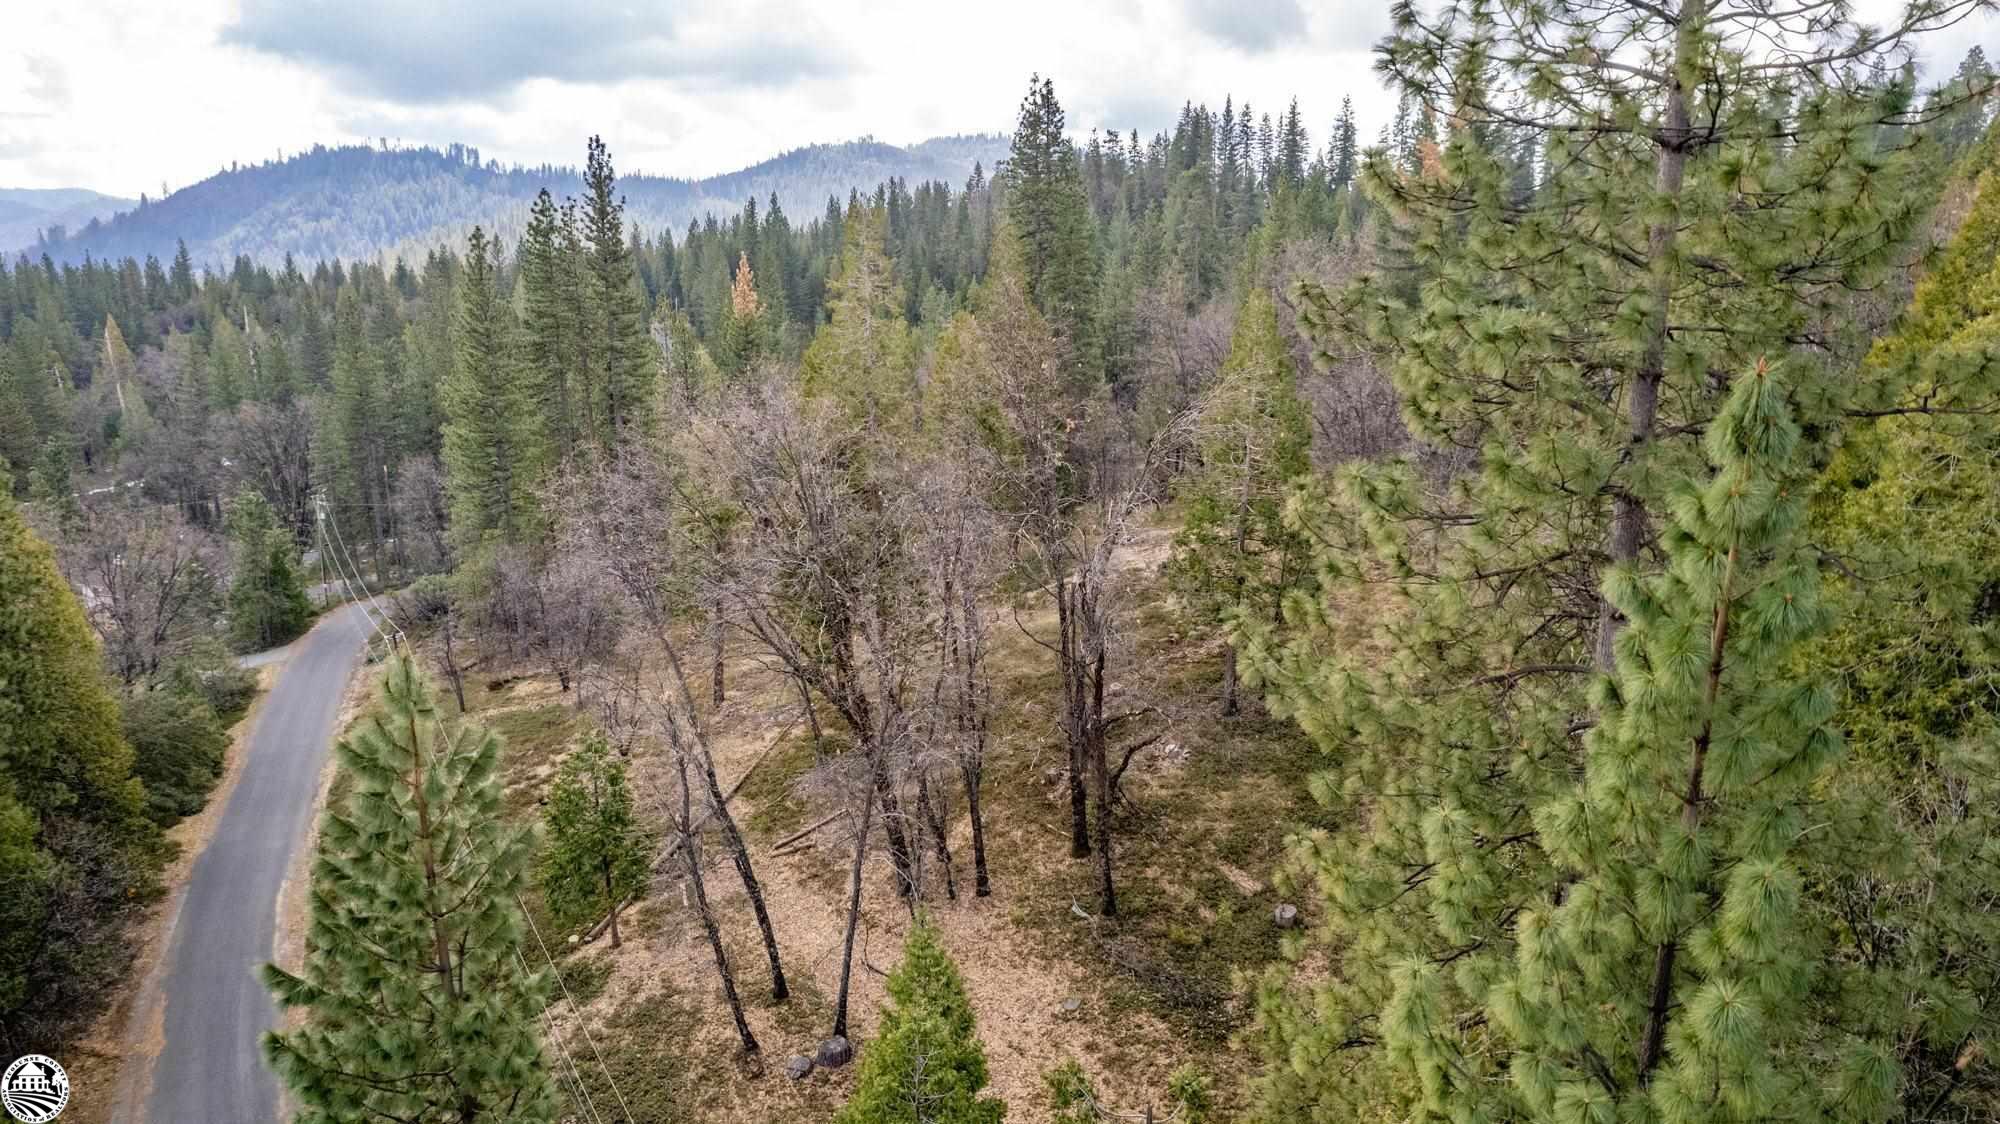 Buildable and Beautiful! This cleared 3.07 acre parcel has gorgeous eastern views and three potential home sites. Electricity and Water nearby for easy hook up. Septic required. Survey complete! Dream home ready!